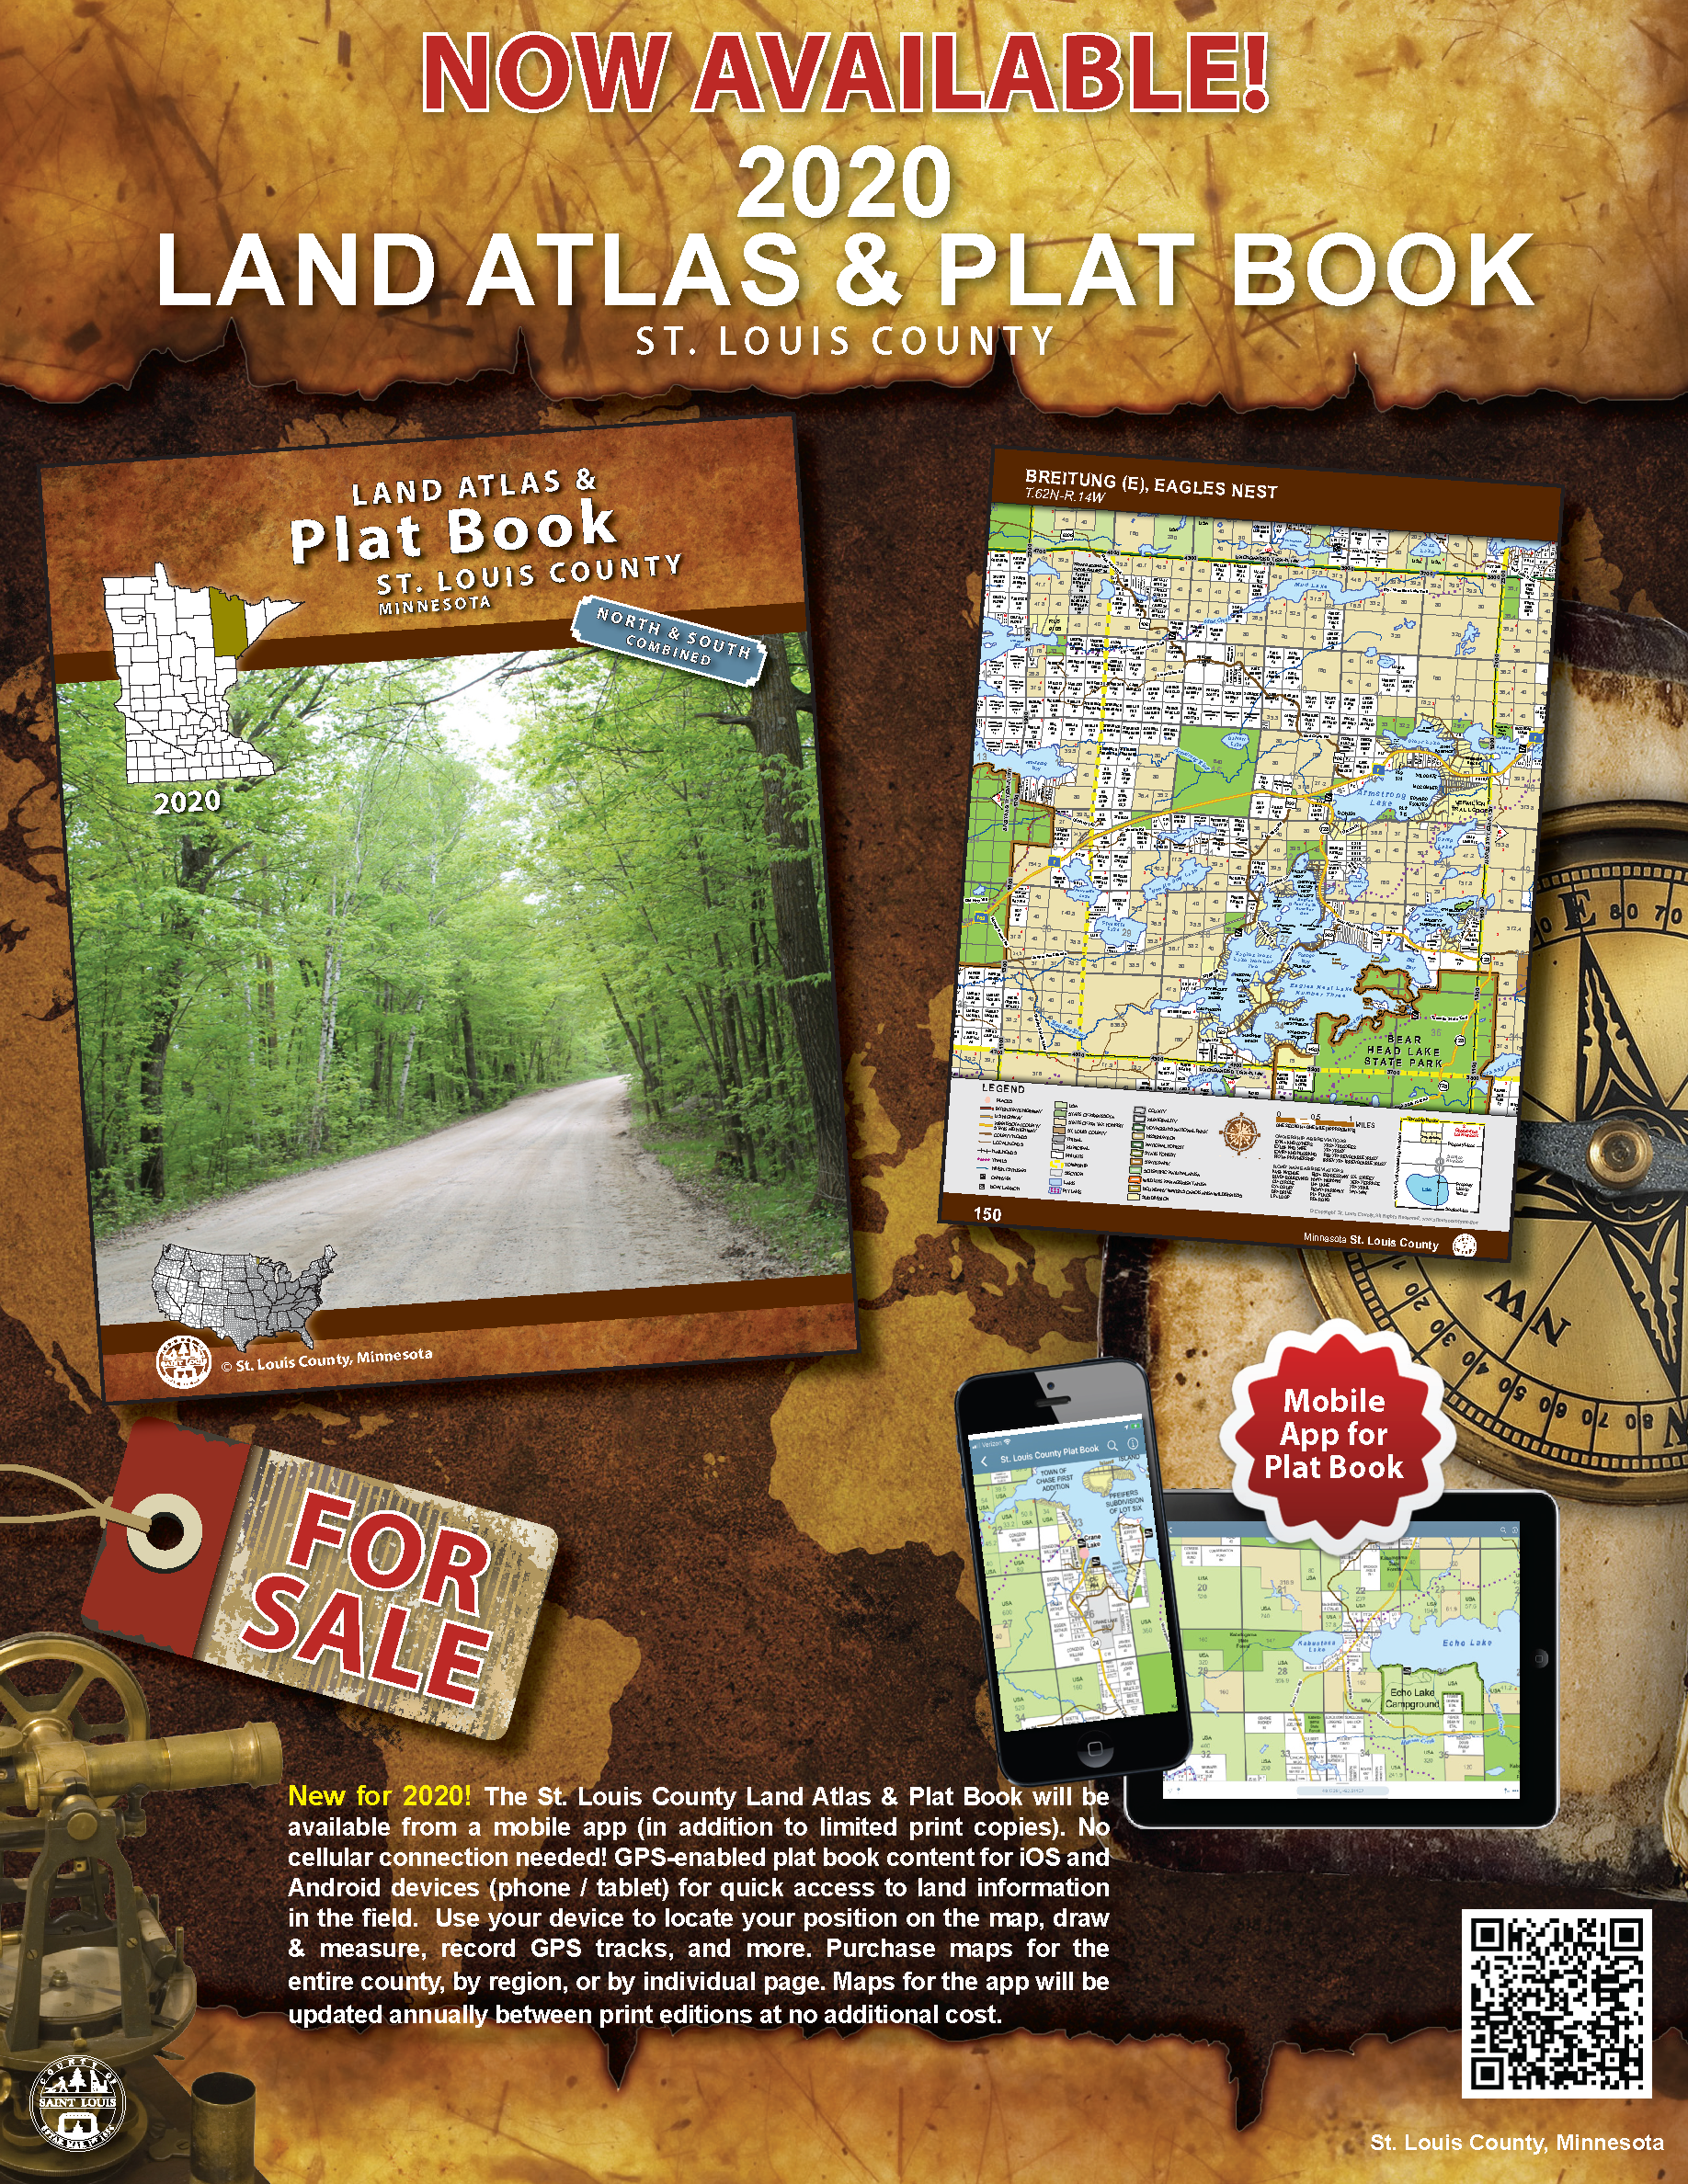 2020 Land Atlas & Plat Book Now Available!